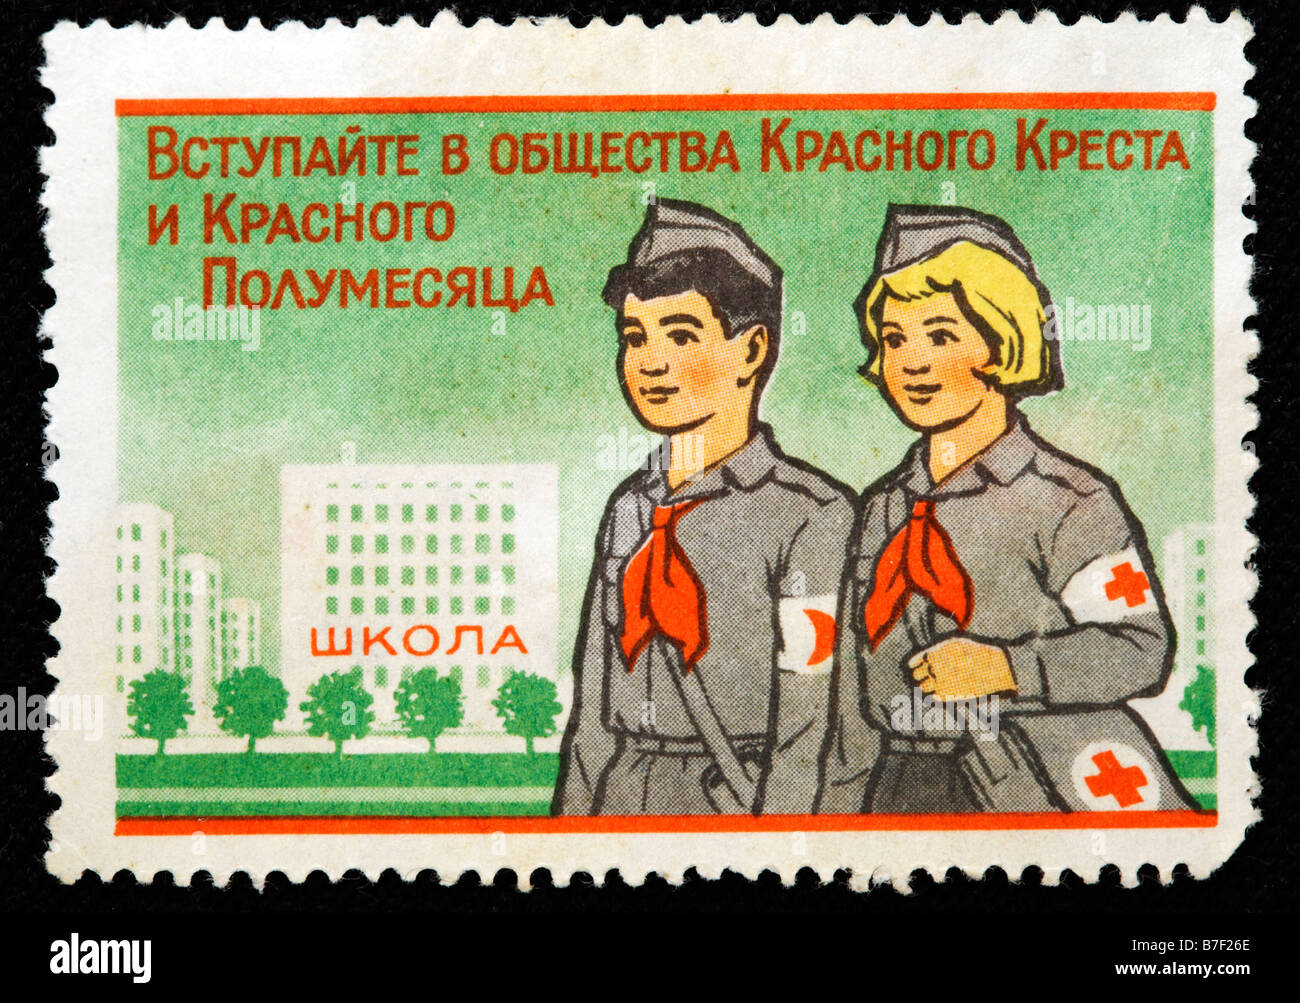 Red Cross and Red Crescent society, postage stamp, USSR Stock Photo